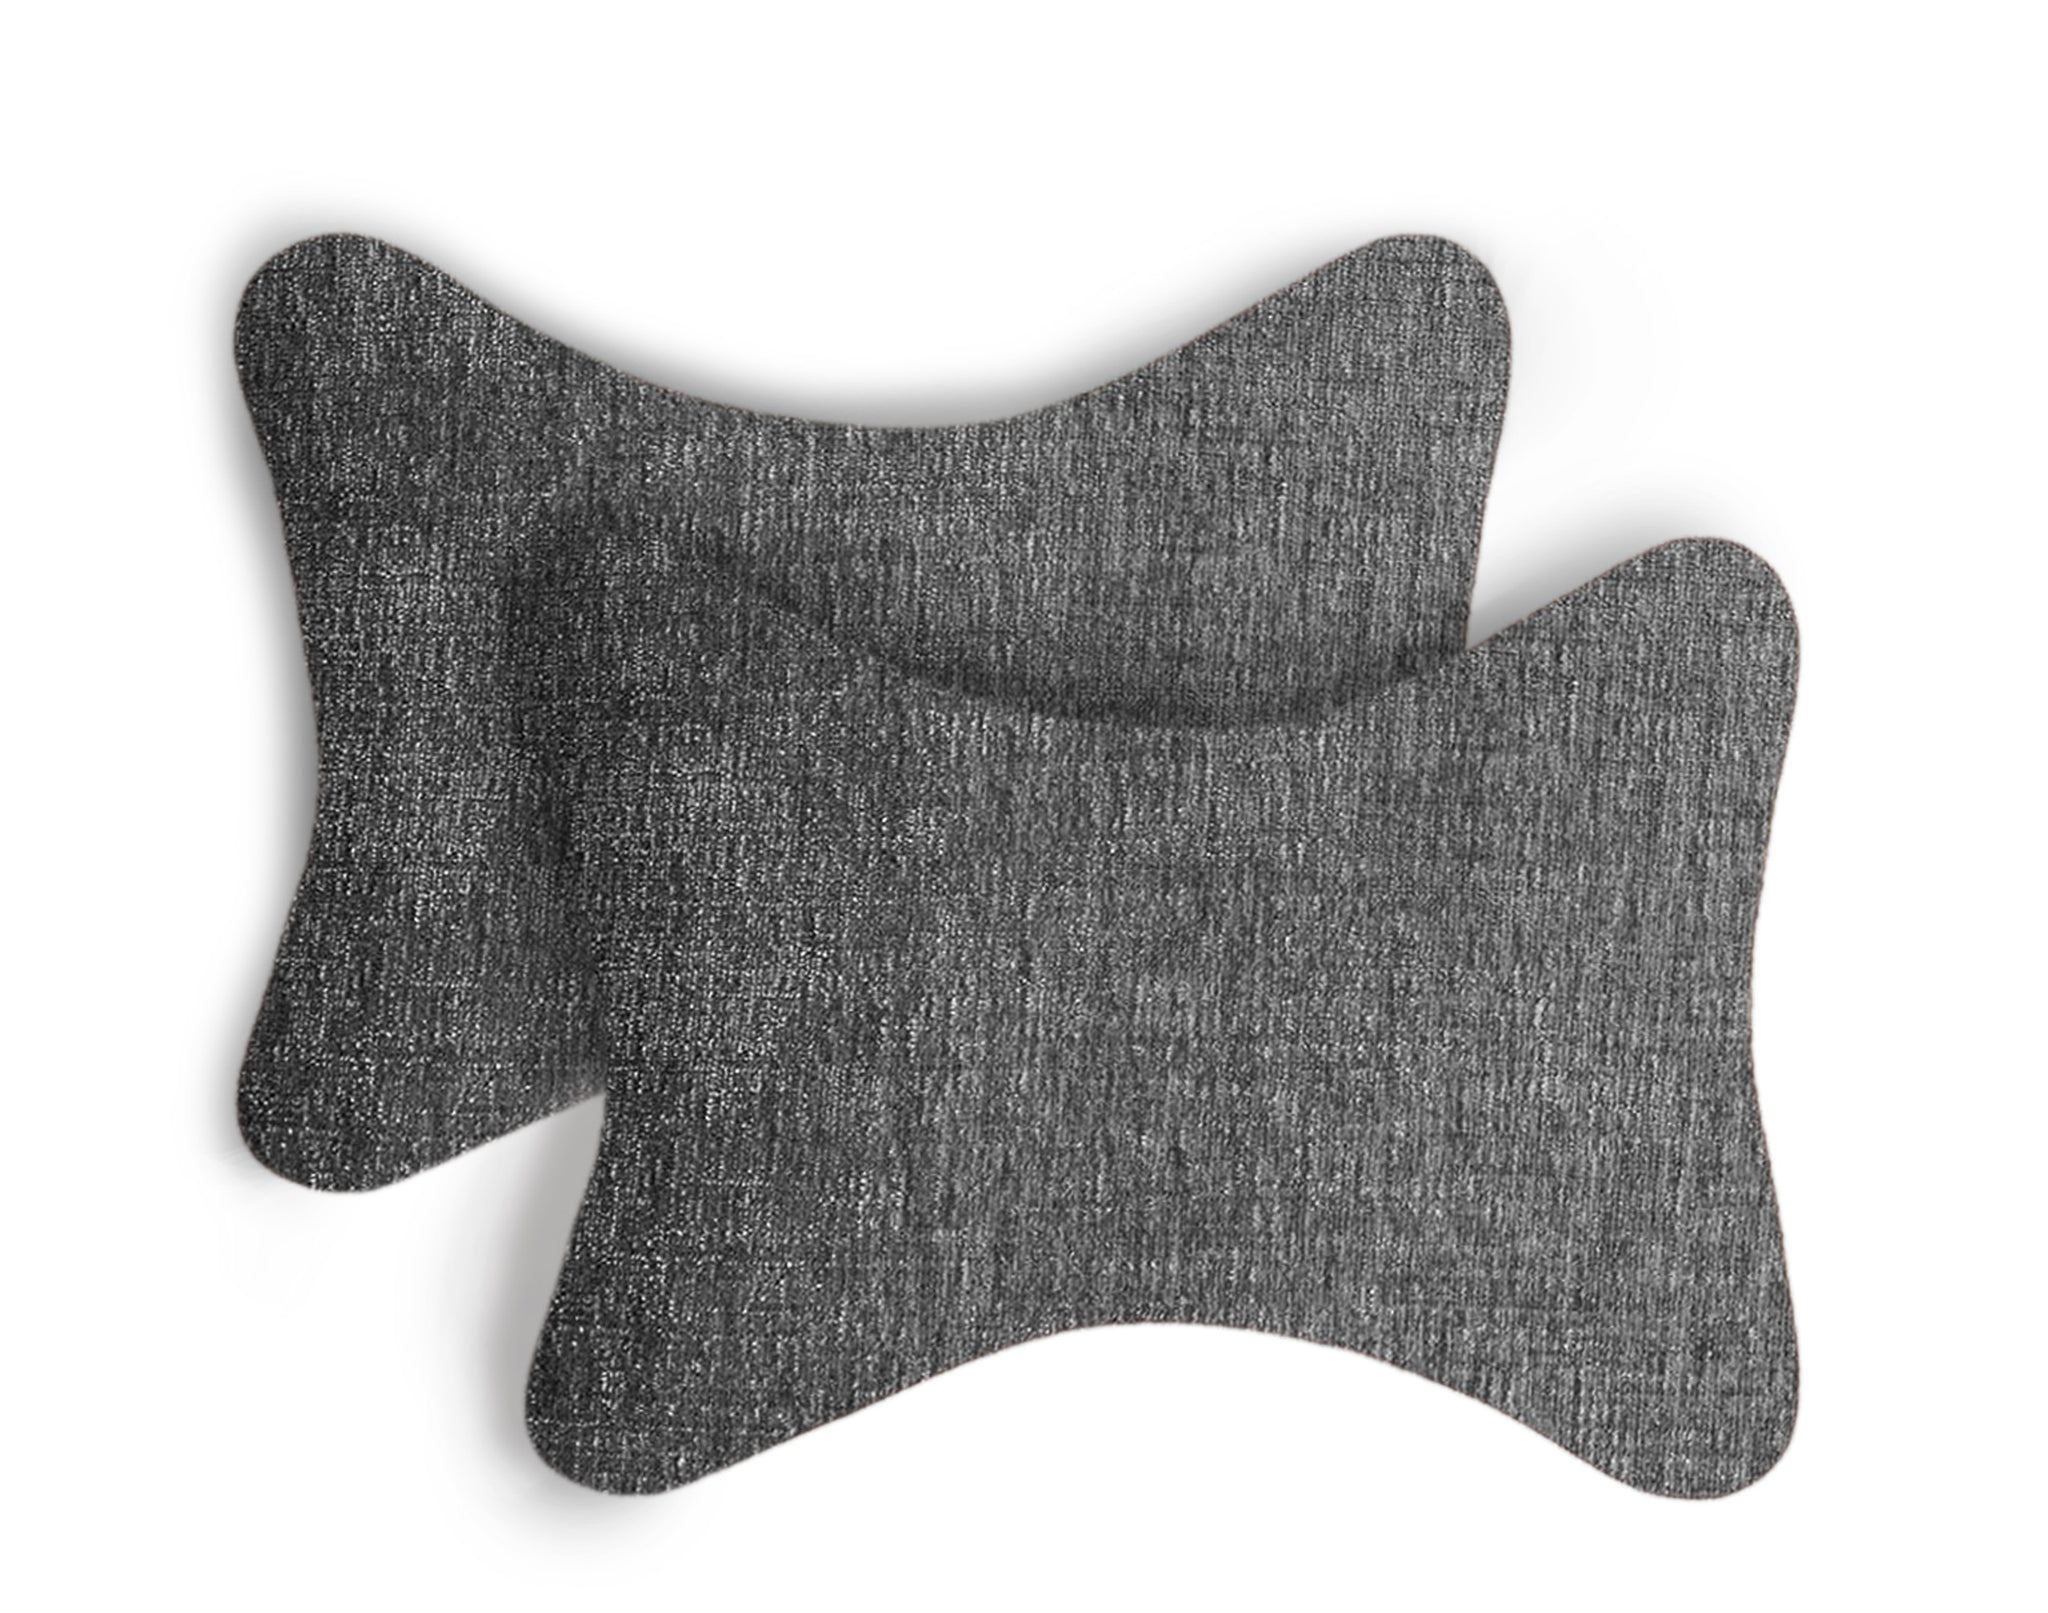 Car Seat Neck Rest Pillow, Cushion For All Cars, Premium Designer Chenille Lumbar, Back and Headrest Support for Car Seat, Size 17x27 cms, Grey, Set of 2 by Lushomes